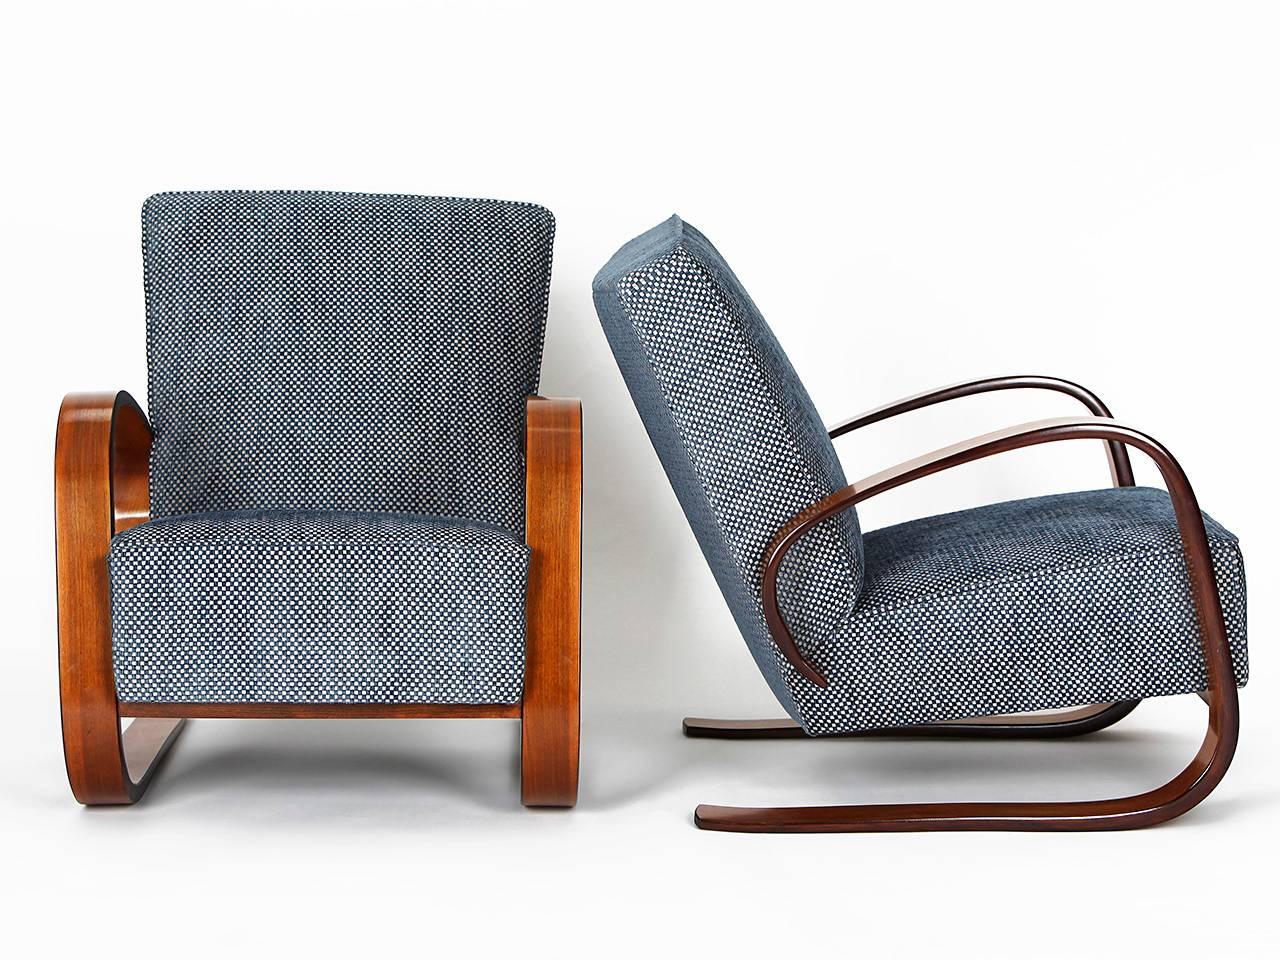 Pair of cantilever chairs designed by Miroslav Navratil.
Produced by Spojene UP Zavody in the 1950s. Armchairs were completely restored, including a new spring core. Restored armrests with walnut veneer.
Upholstery covered with an English fabric